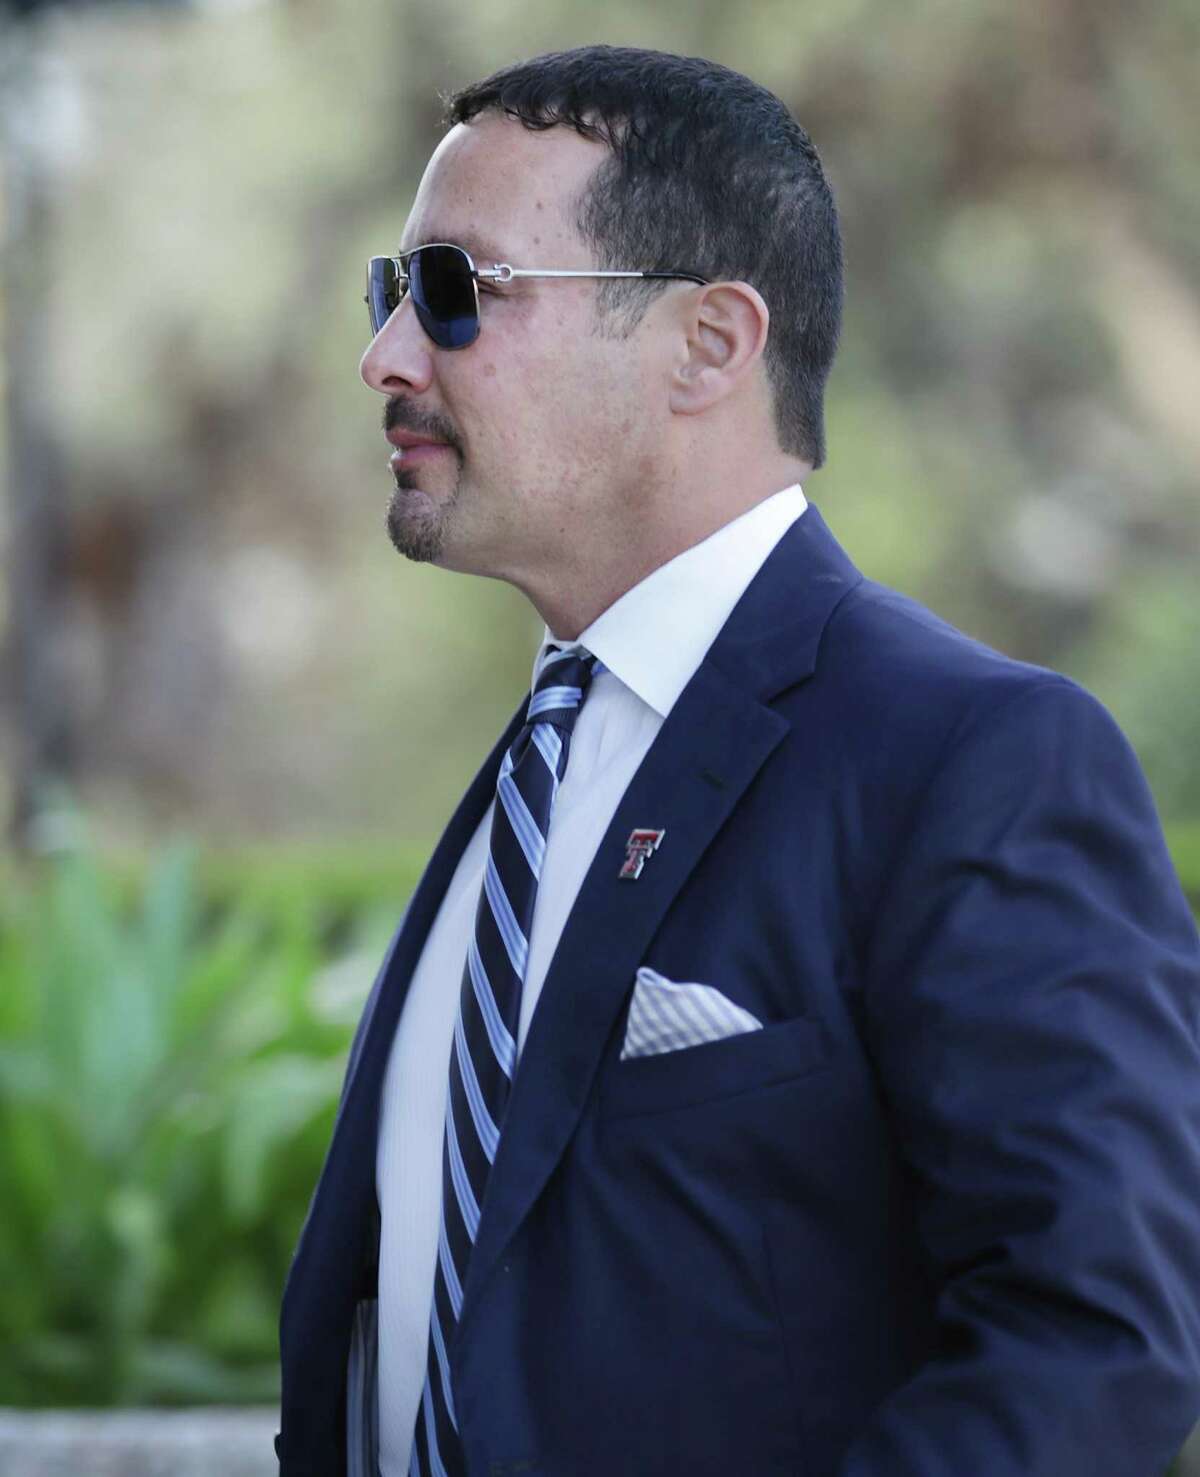 Brian Alfaro, who faces seven counts of mail fraud in connection with allegedly defrauding investors in the sale of units in oil and gas wells, arrives at the John H. Wood Jr. U.S. District Courthouse.